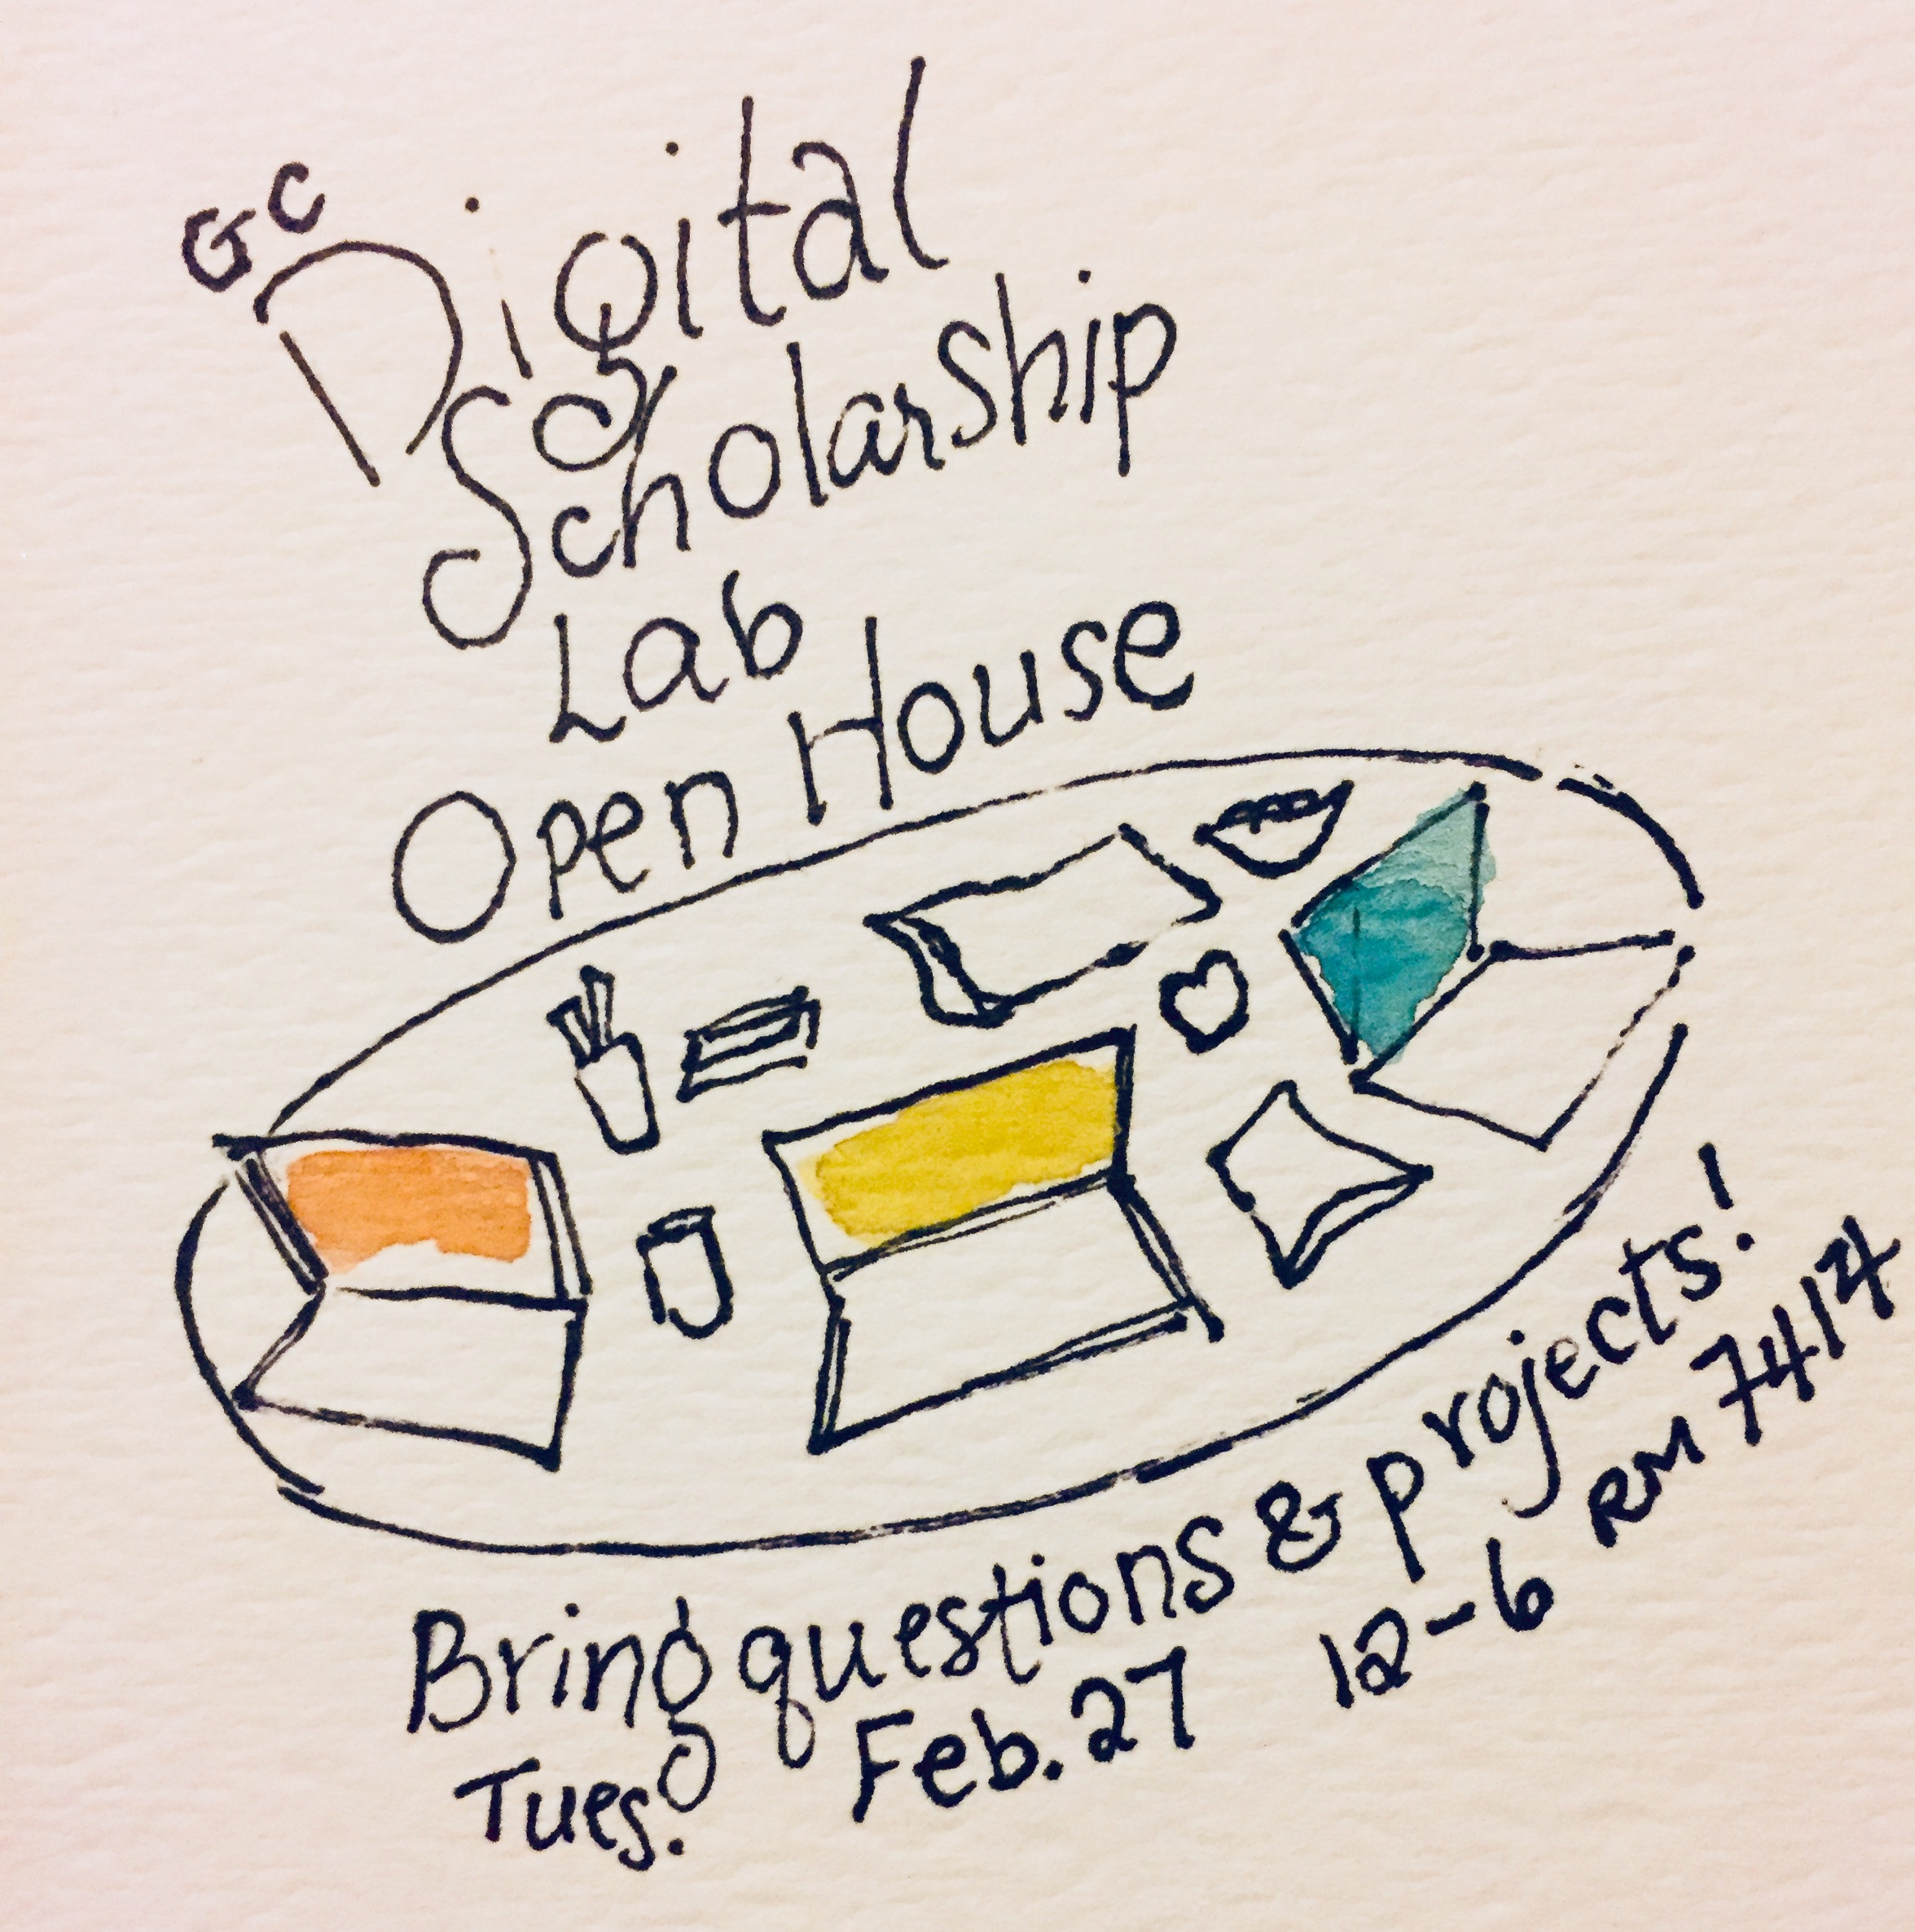 First ever GC Digital Scholarship Lab Open House – Join us on February 27th